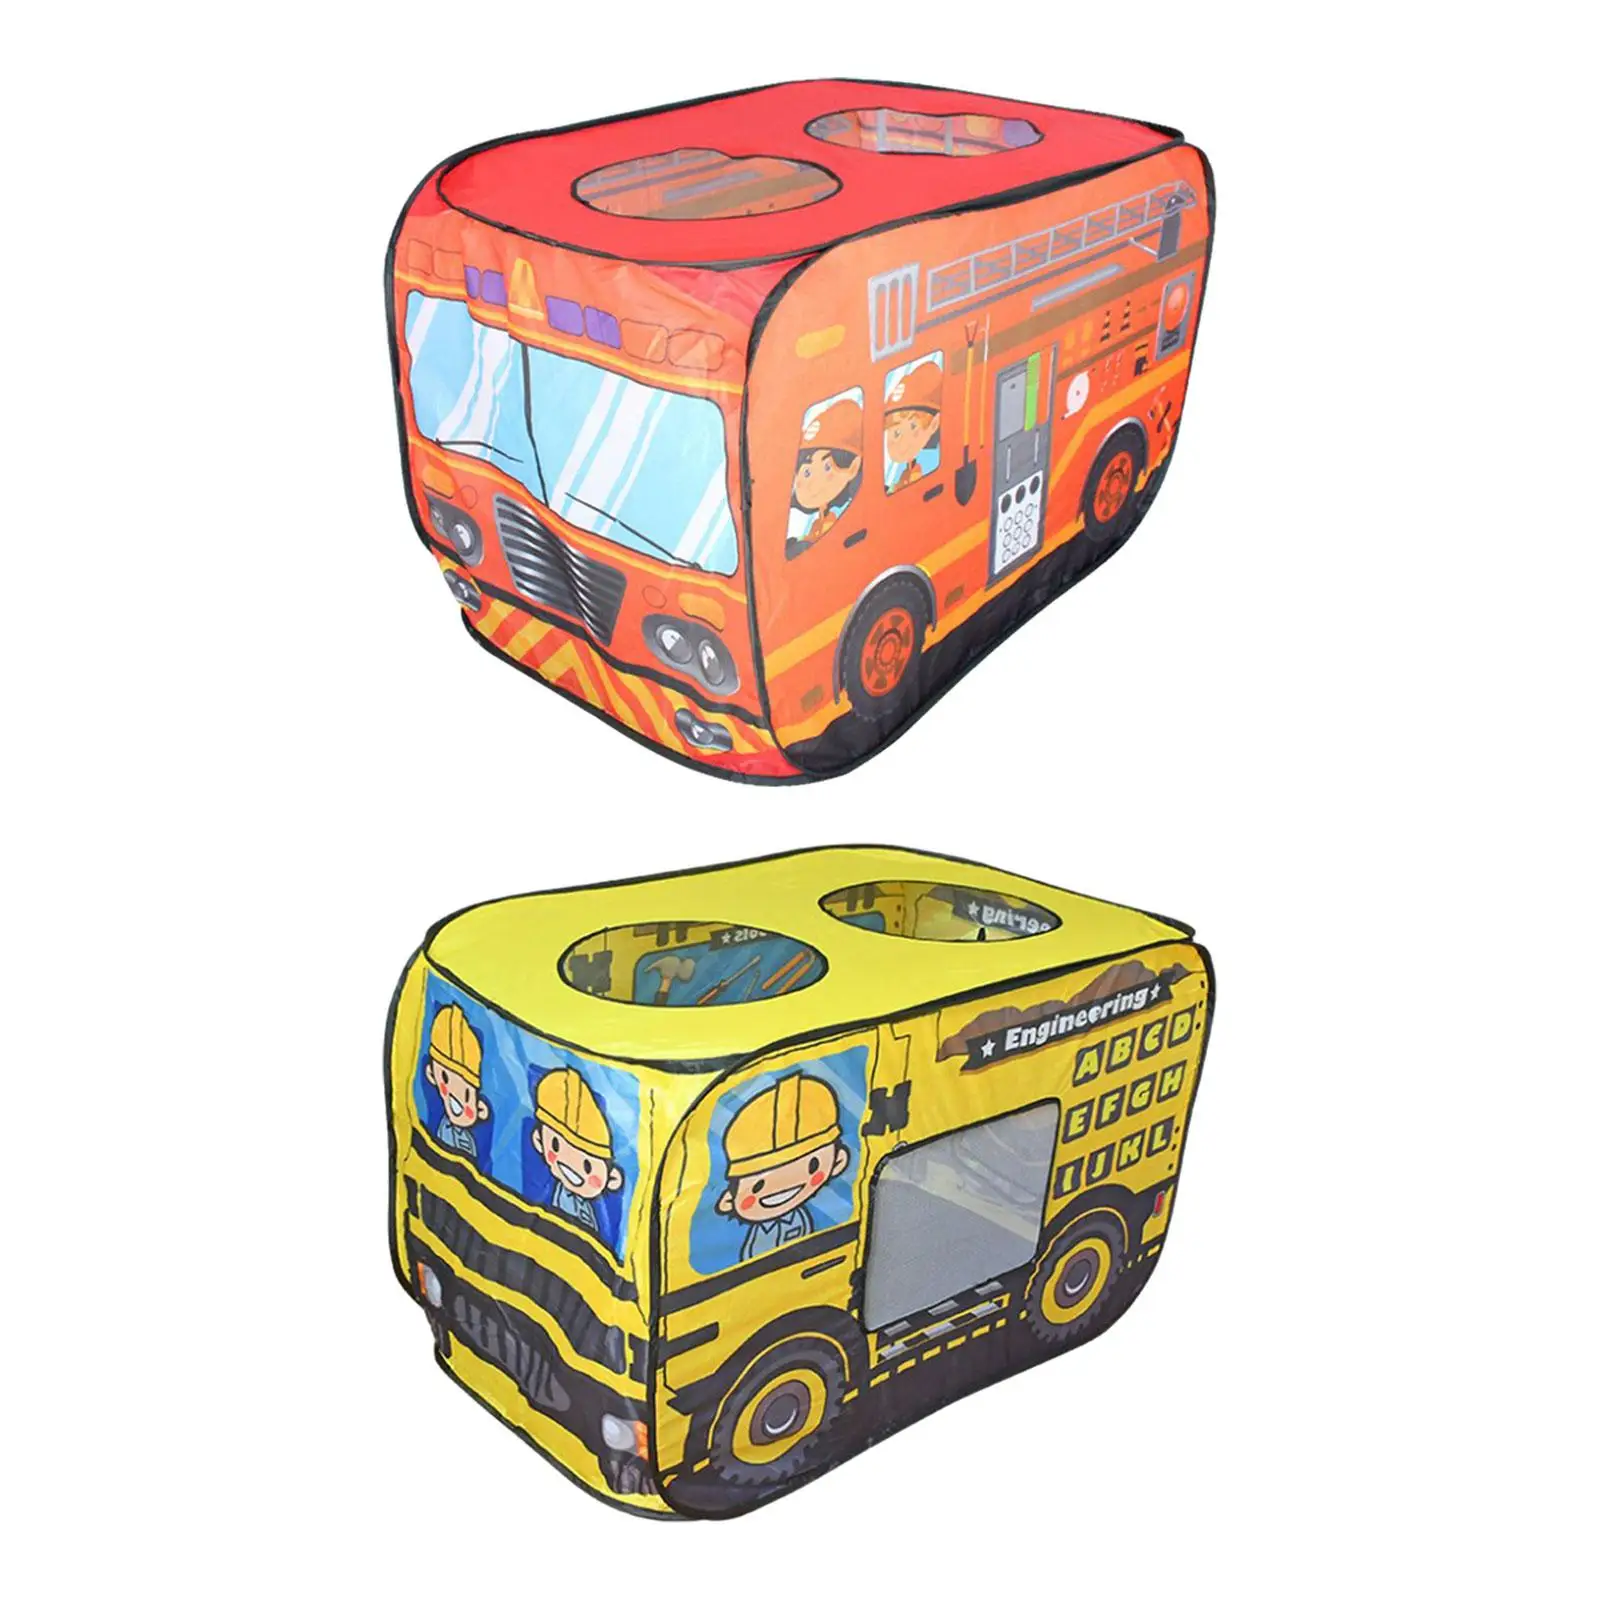 Cartoon Car Play Tent Playhouse Castle Toy Playhouse Play Fun Foldable Tent for Camping Backyard Yard Indoor Holiday Gifts